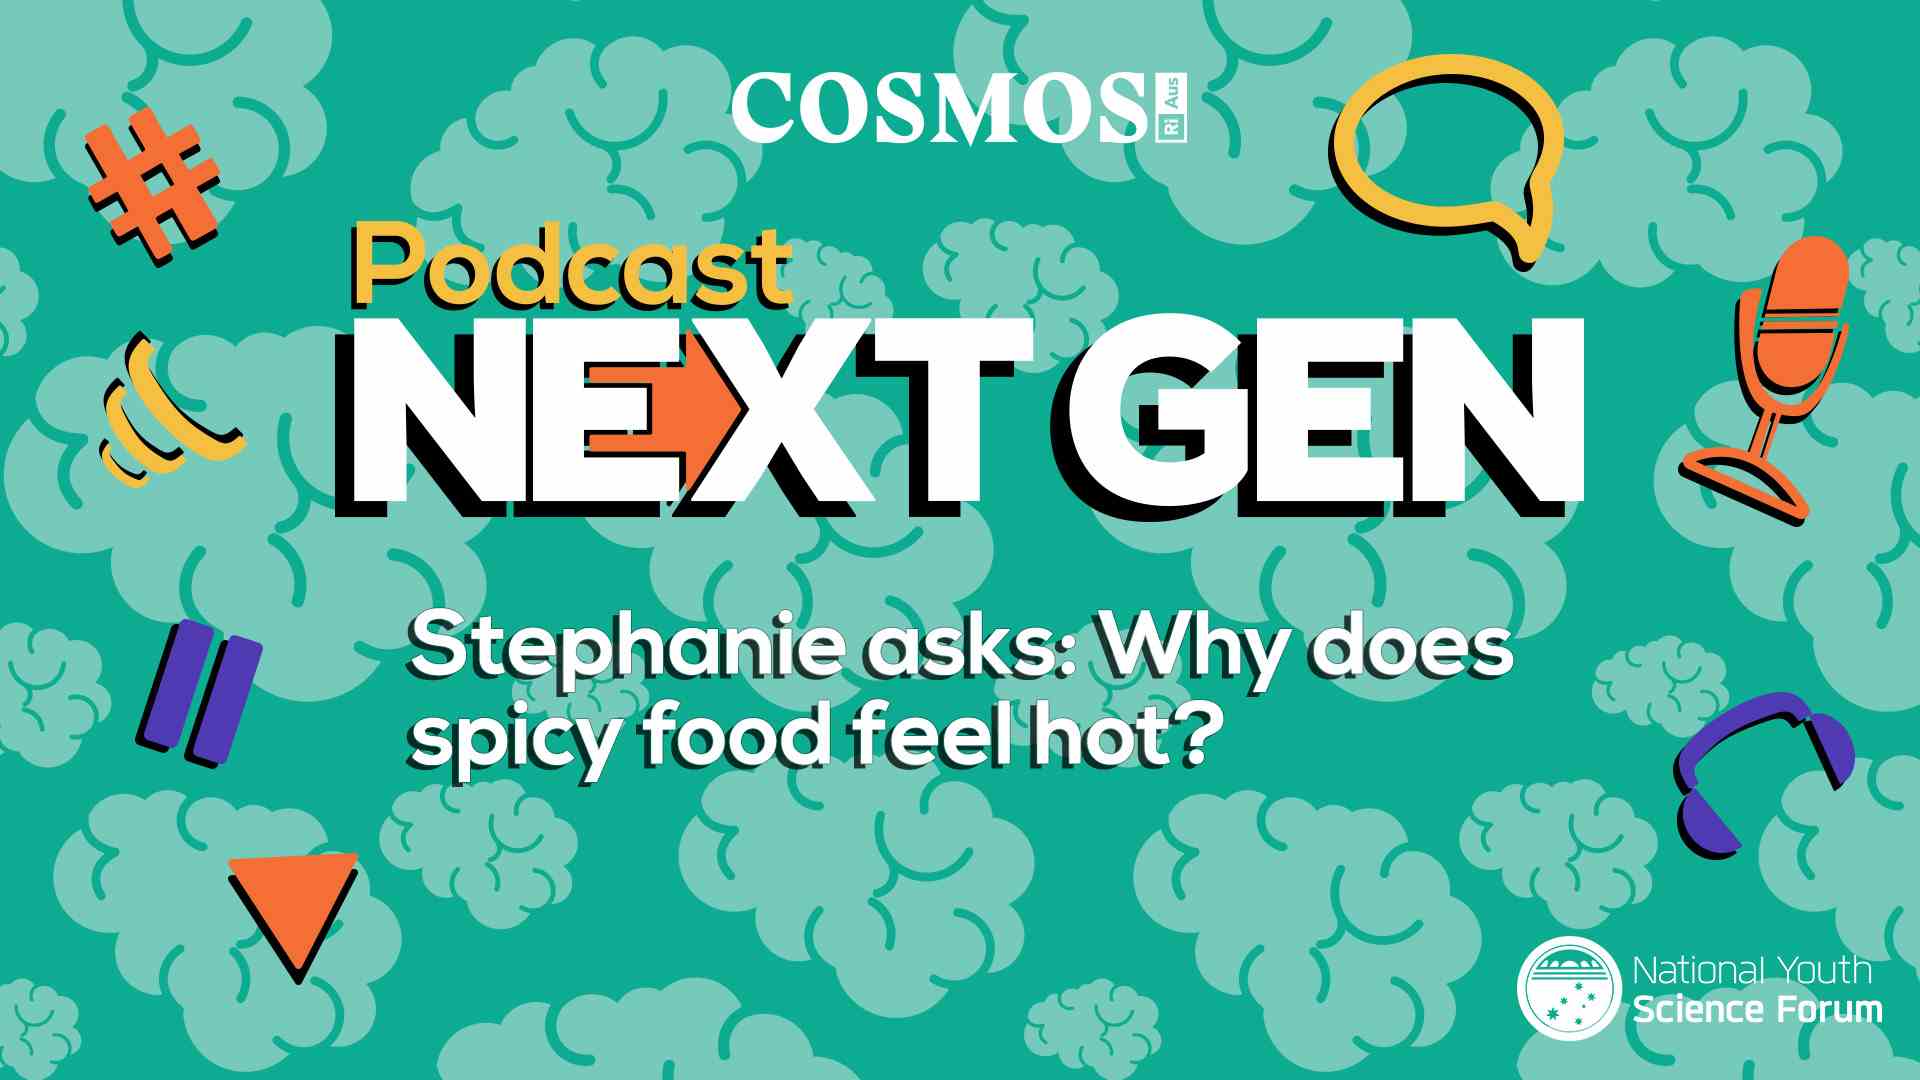 PODCAST NEXT GEN: Why does spicy food feel hot?